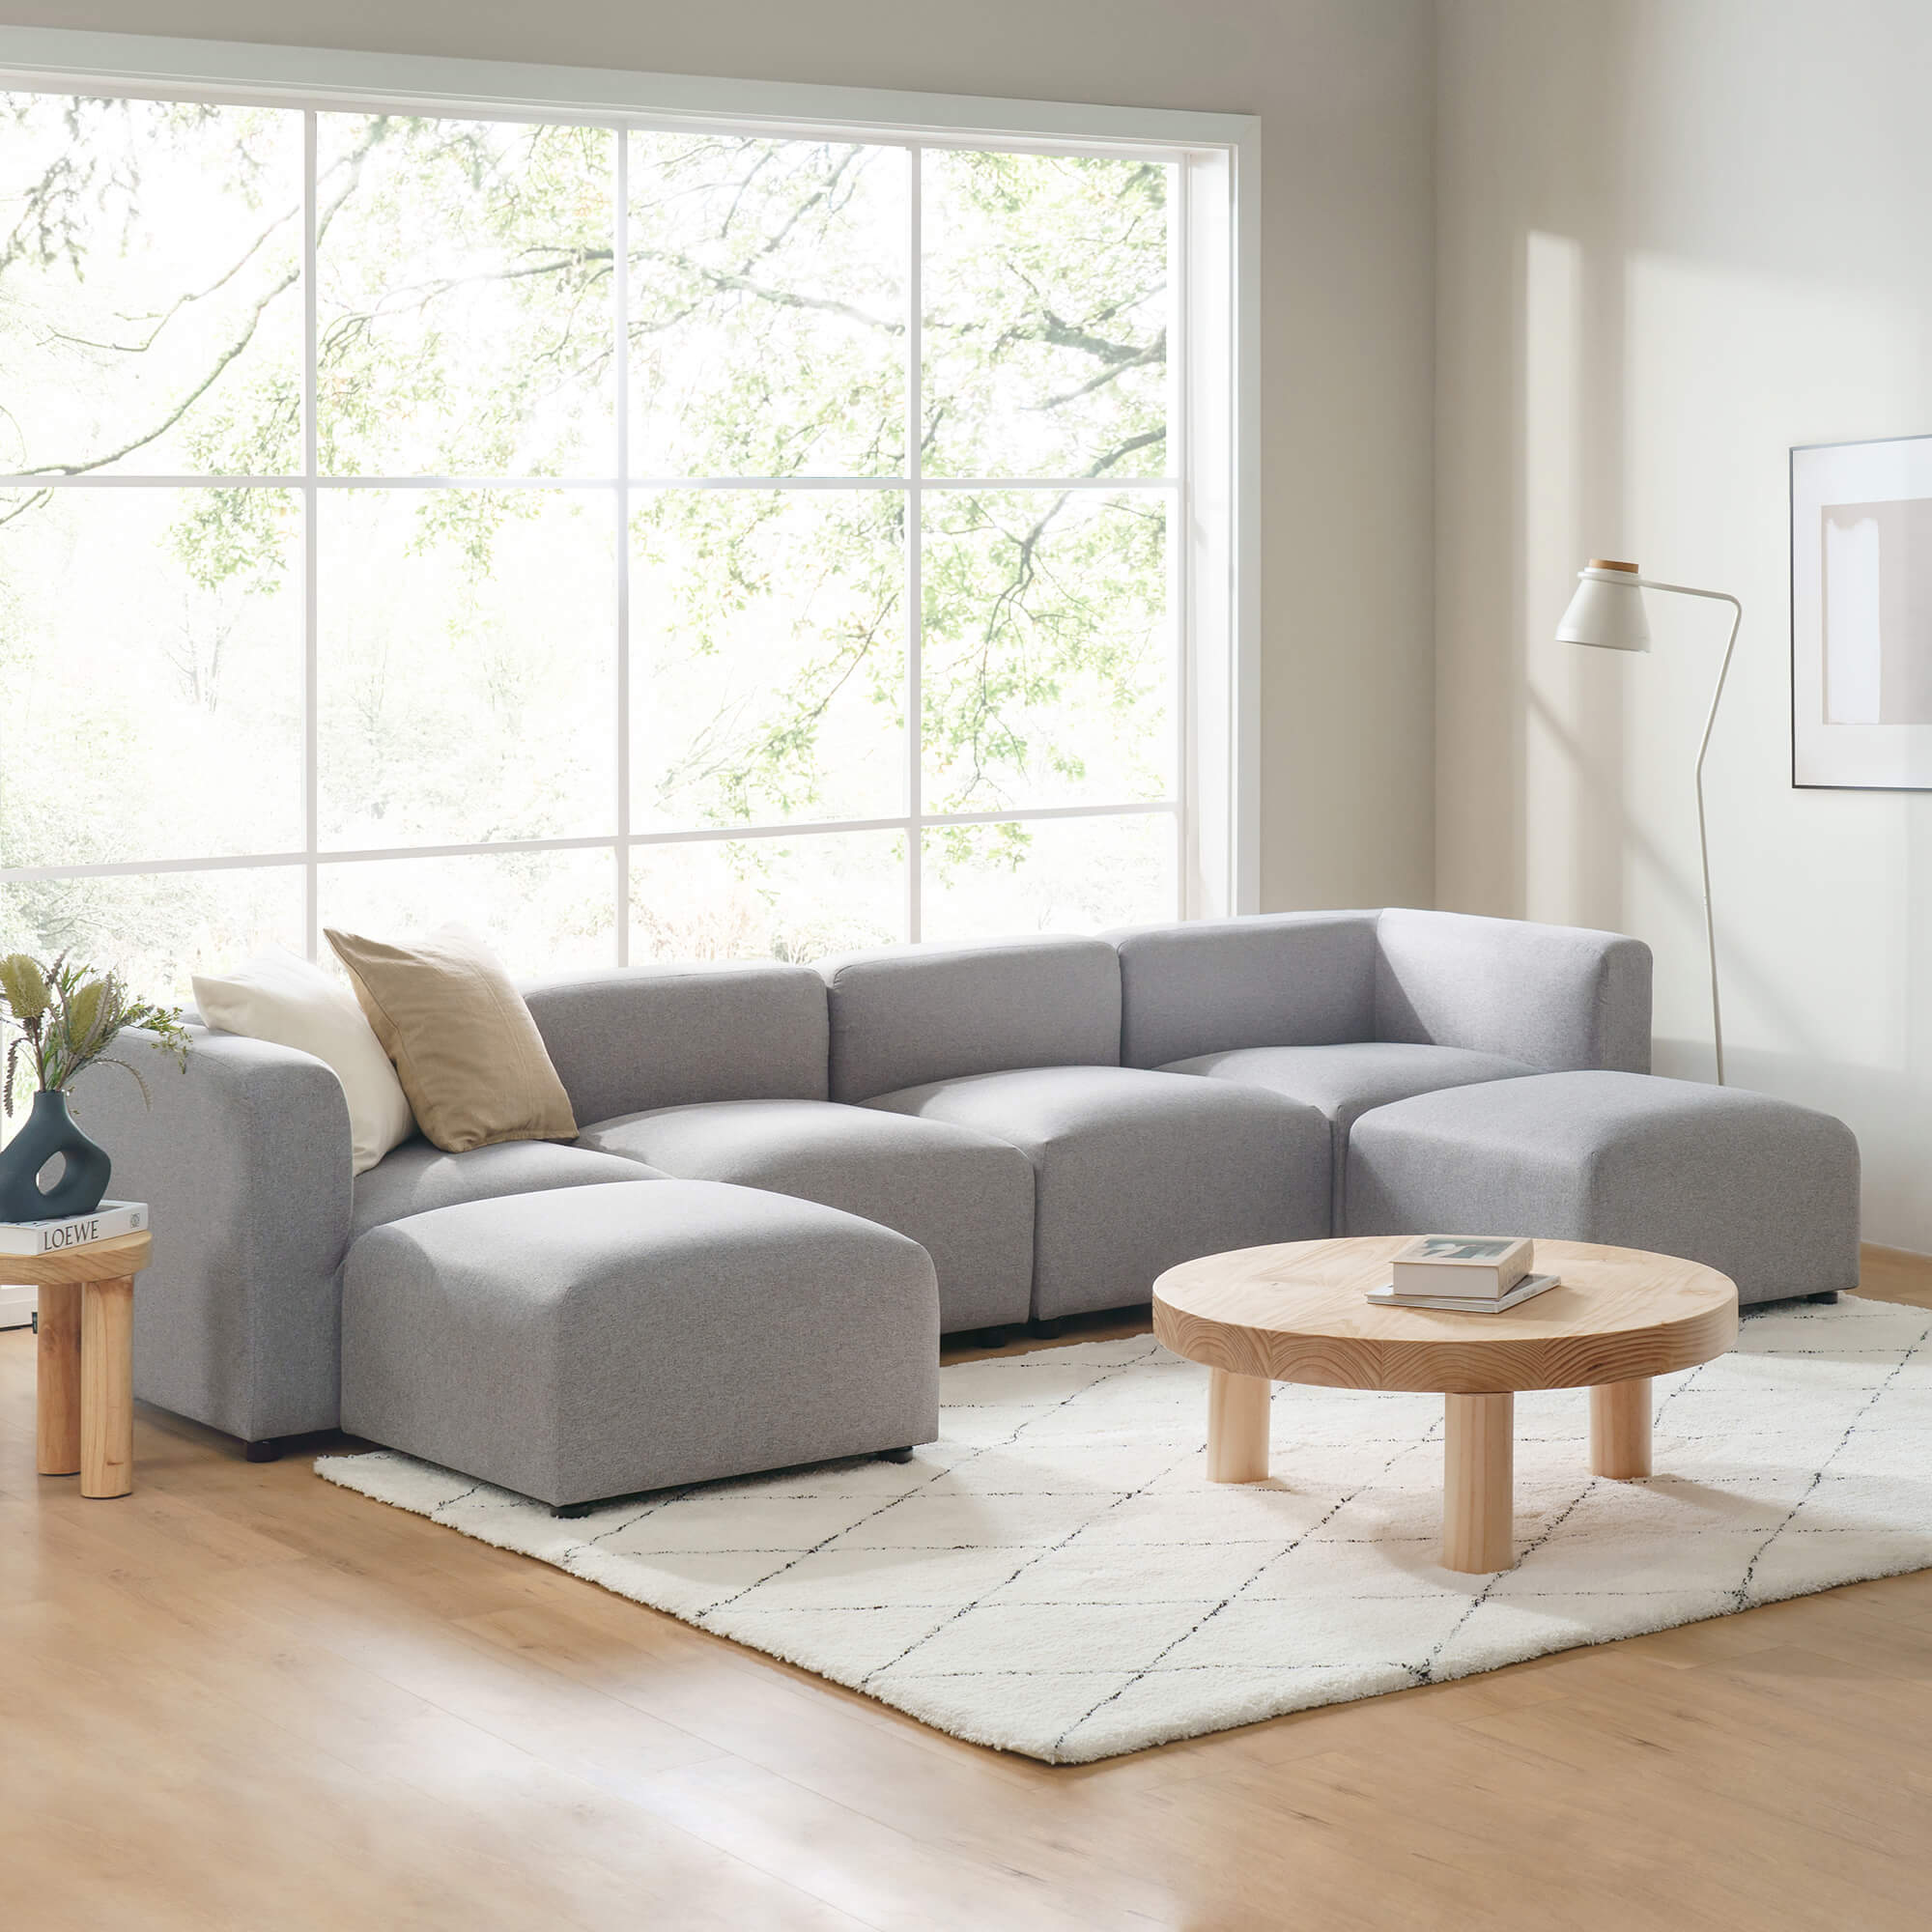 Spacious  grey Luca Double Chaise Sectional Sofa in a modern living room setting 